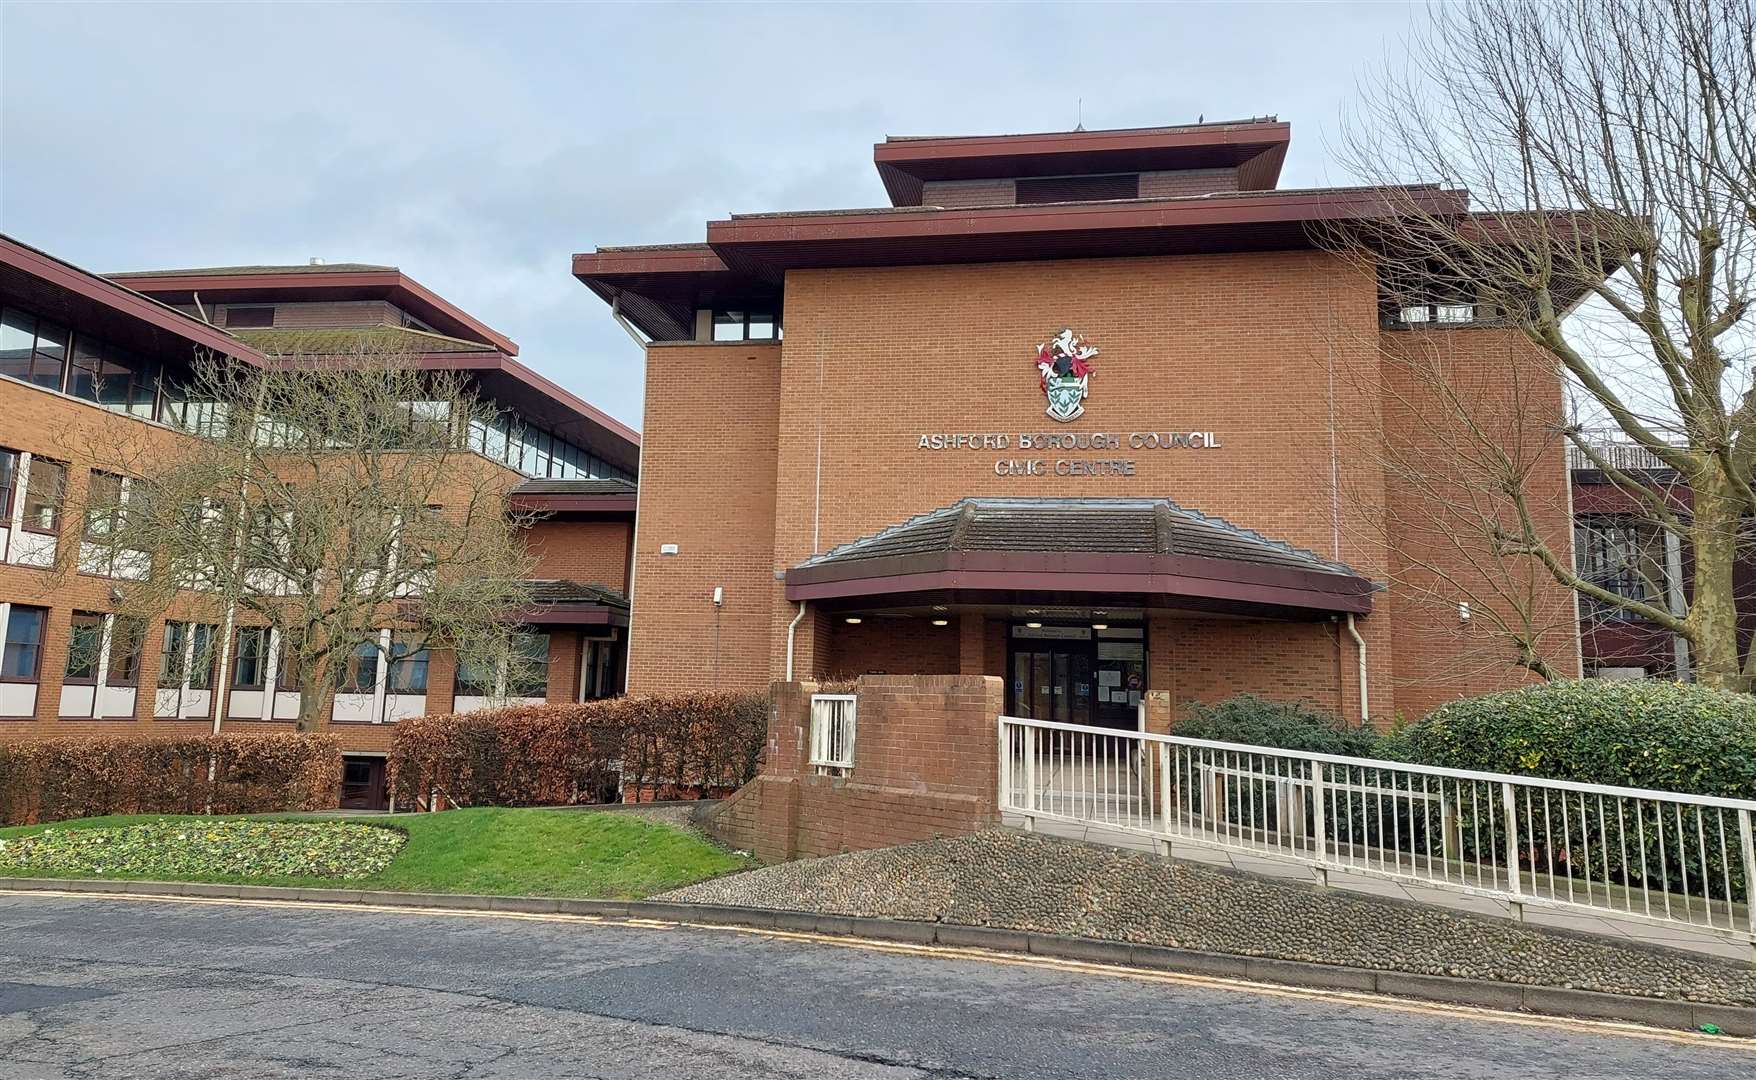 Ashford Borough Council – based at the Civic Centre in Tannery Lane – received a complaint that a shop worker washed their feet in the sink at M.M Cash and Carry